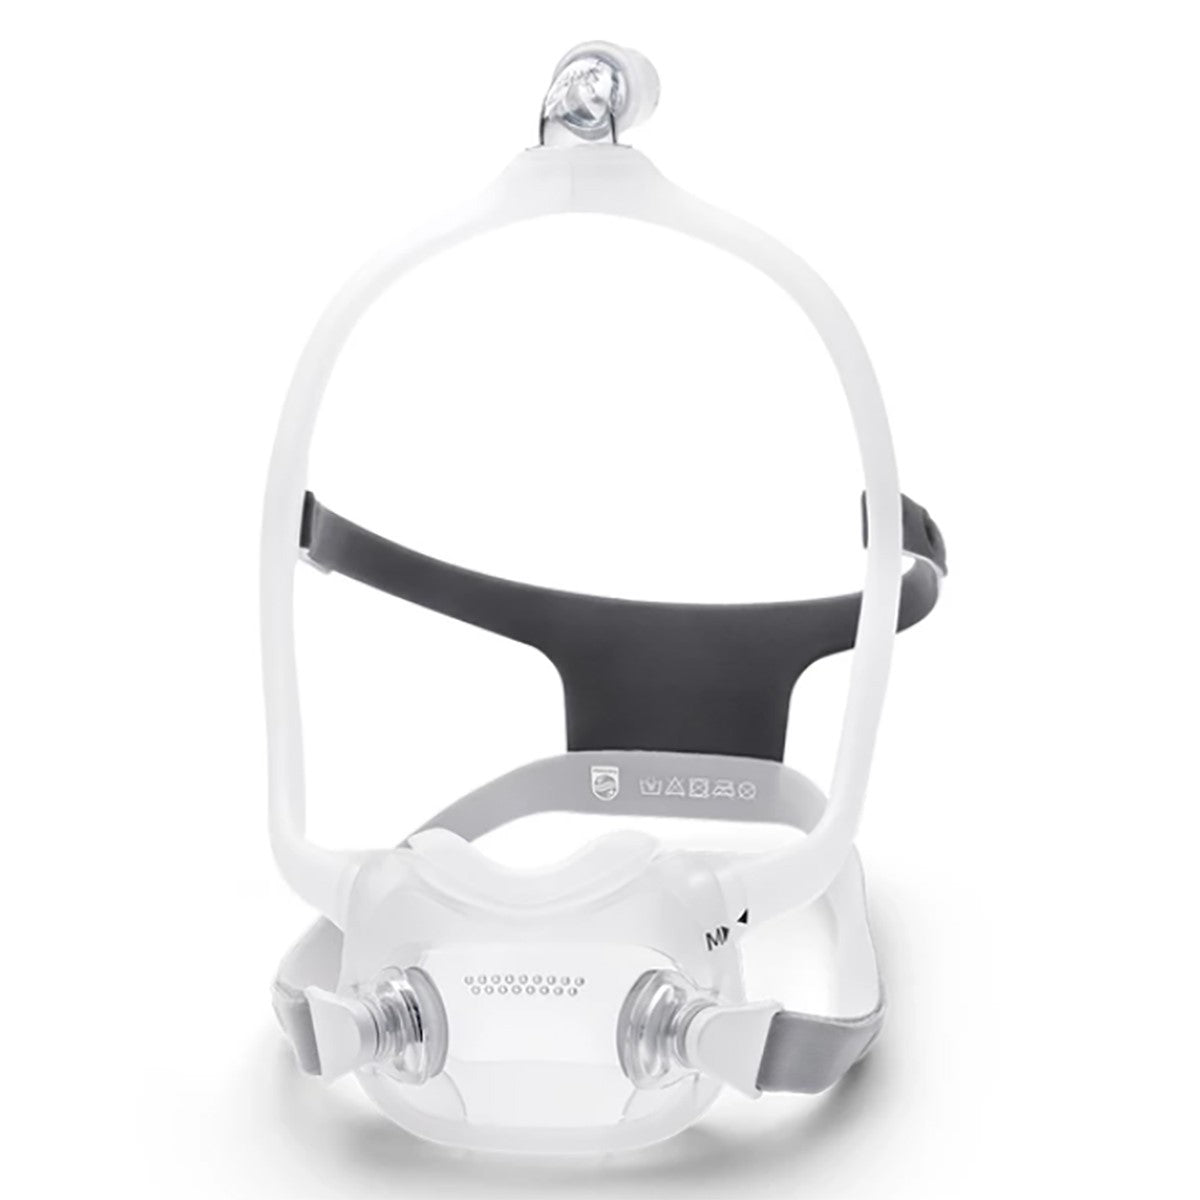 Philips Respironics DreamWear Full Face Mask System with Headgear